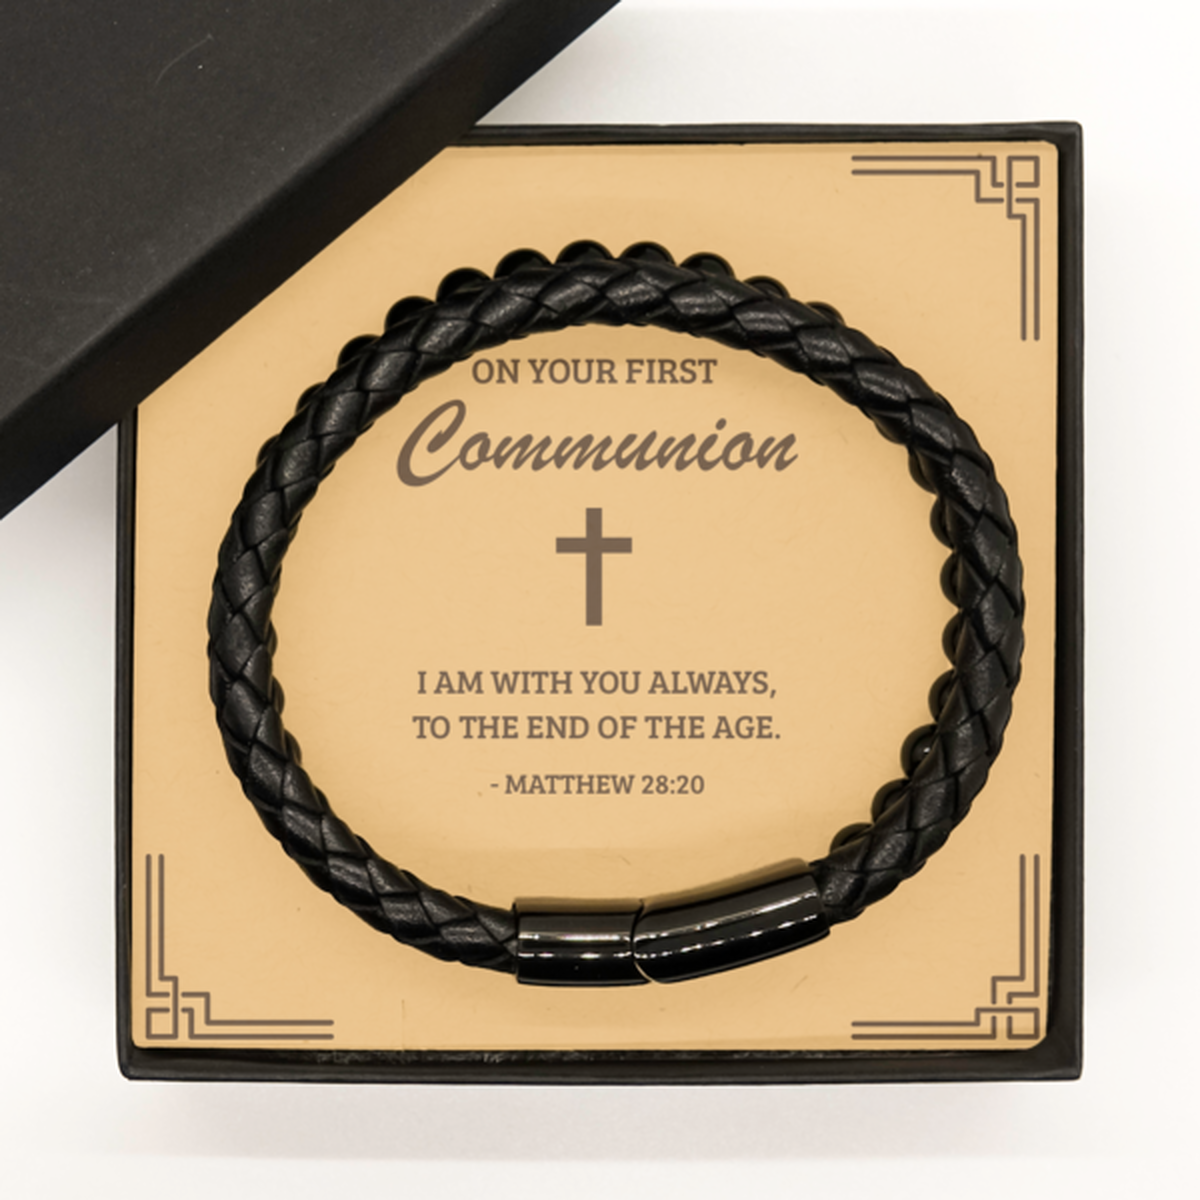 Confirmation Gifts for Teenage Boys, I am with you always, Stone Leather Bracelet with Bible Verse Message Card, Religious Catholic Bracelet for Son, Grandson, Dad, Godfather